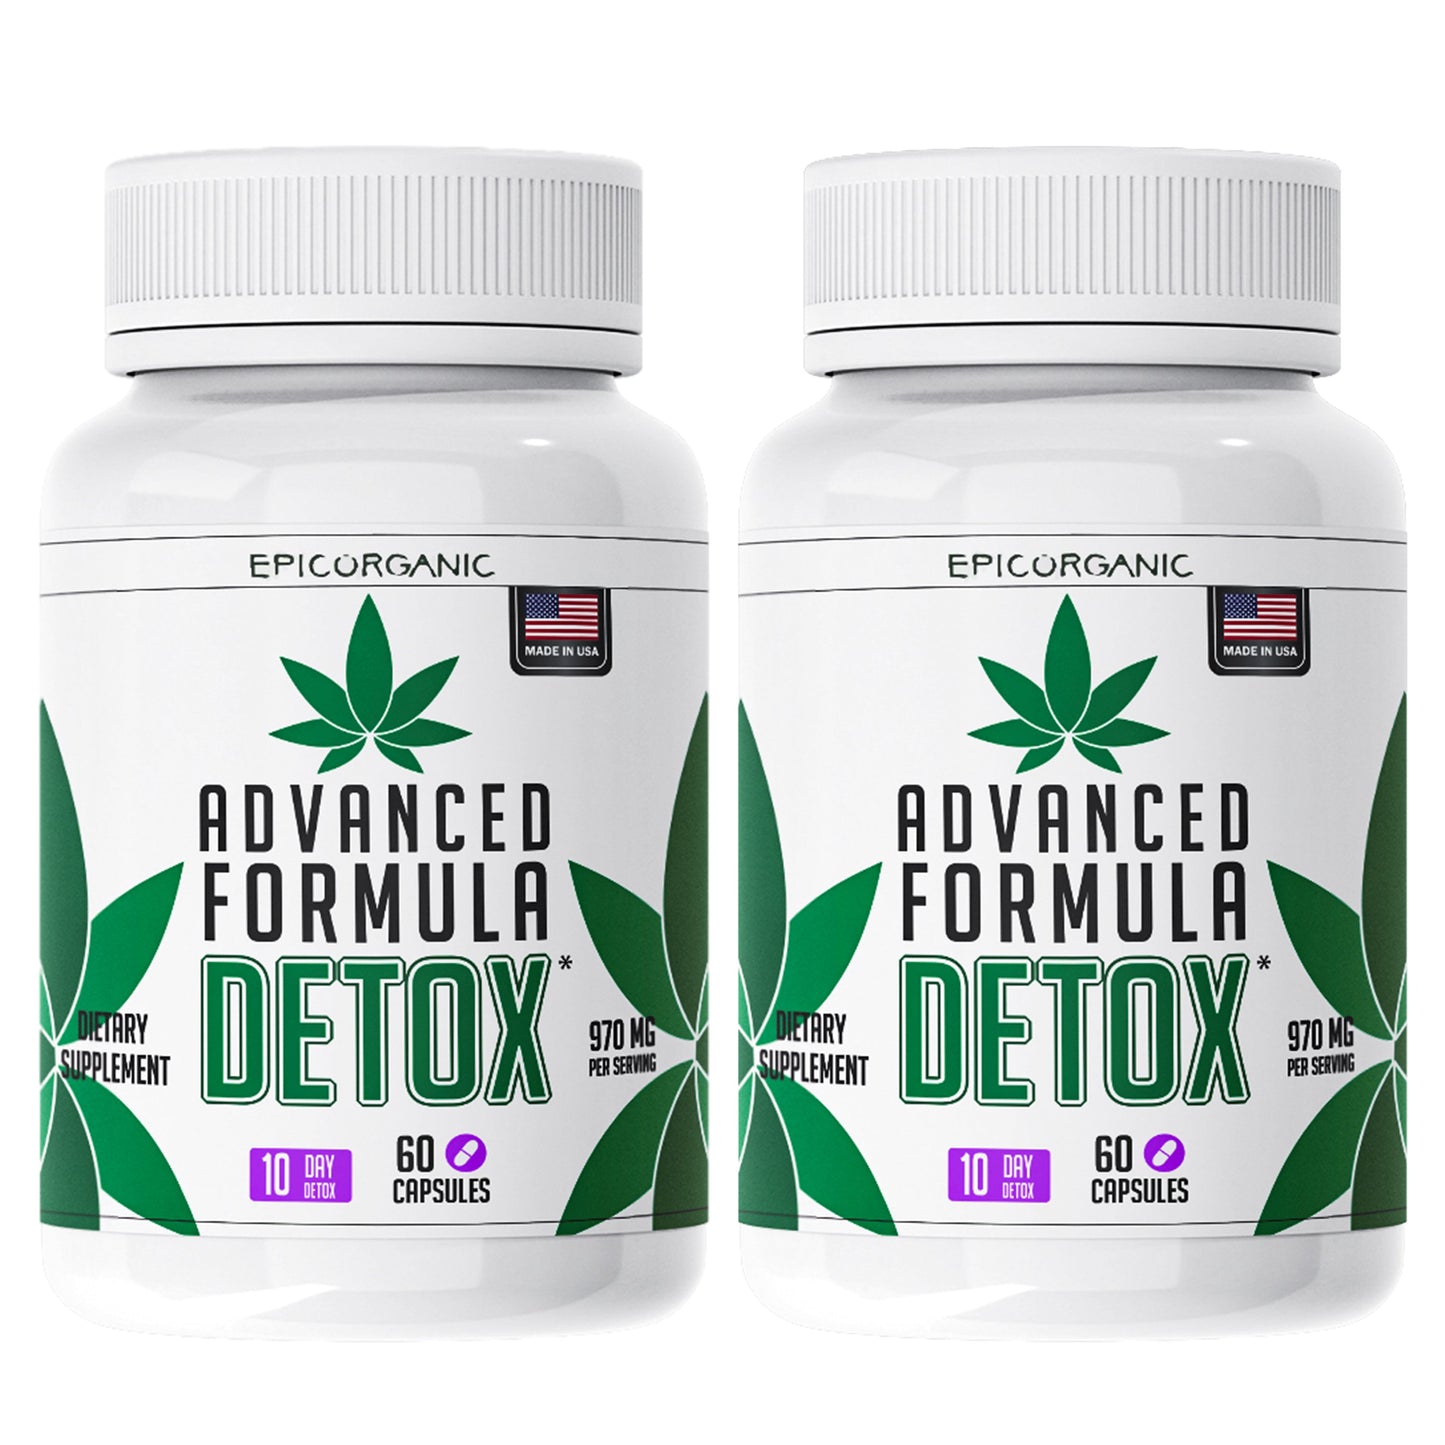 THC & DRUG PERMANENT DETOX CLEANSE FULL BODY WEED CLEANSE (2x Pack) Epic Organic